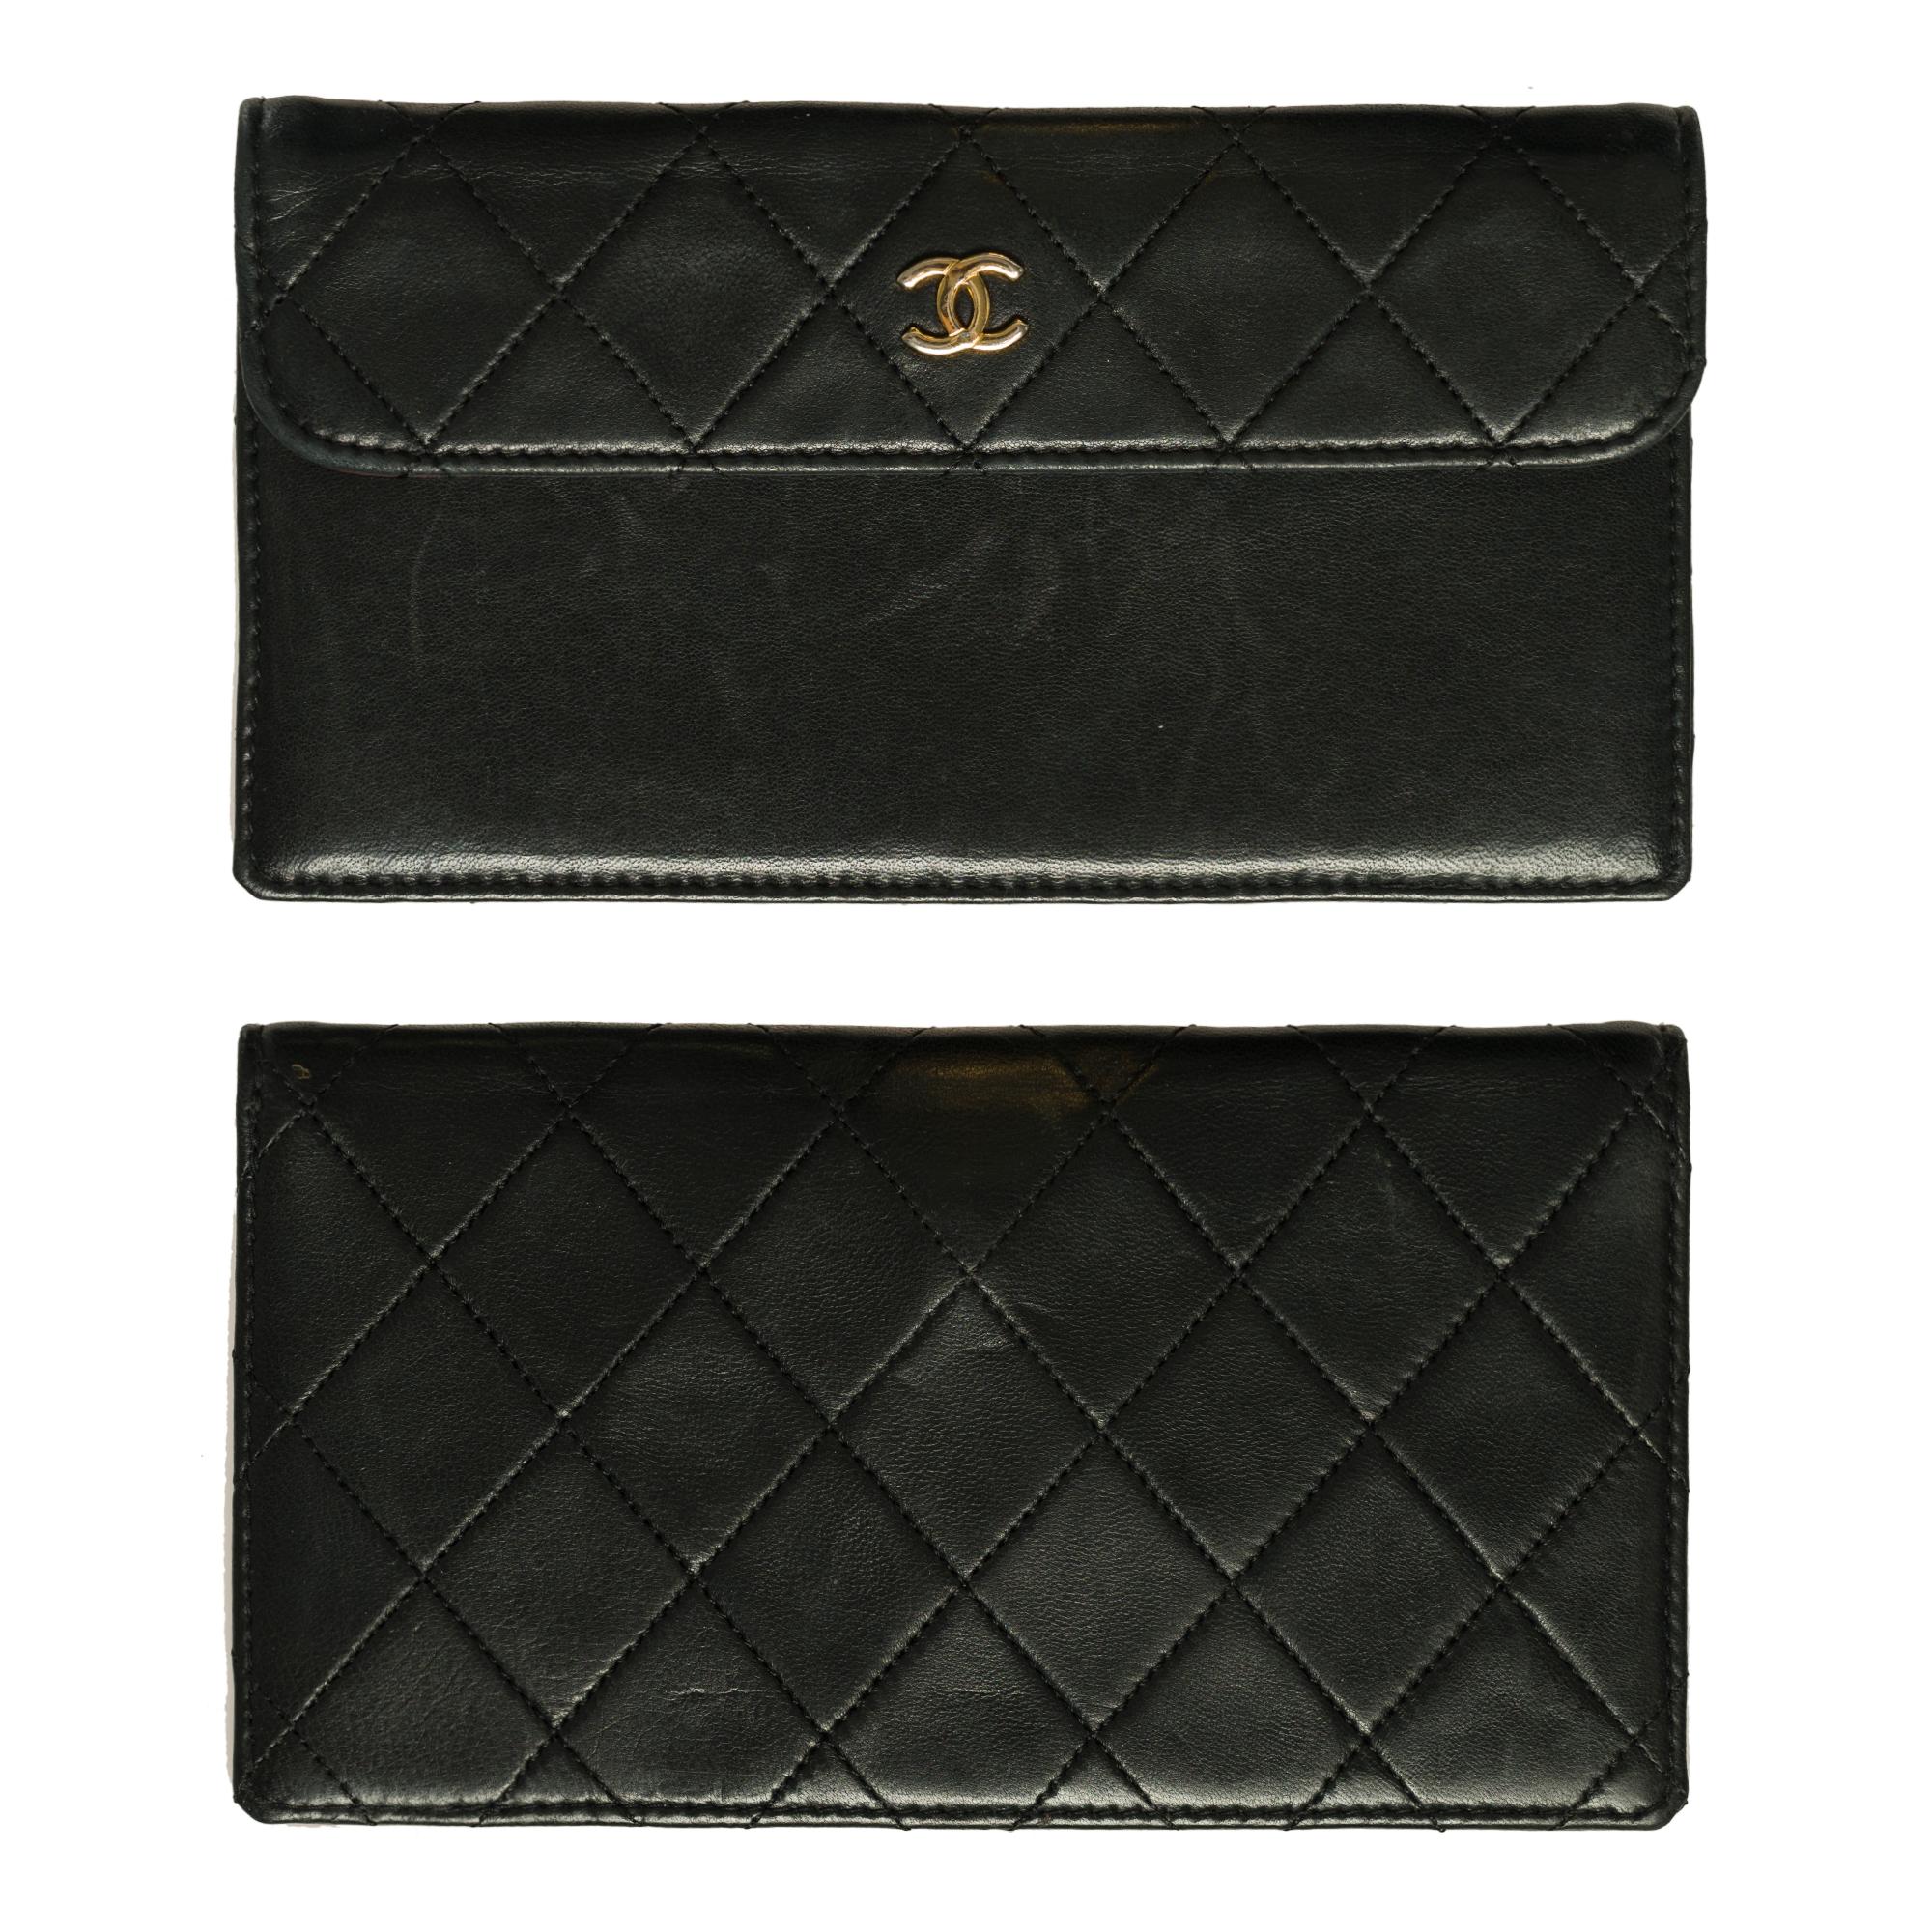 Amazing Chanel Classic bi material crossbody bag in black leather& Jersey, GHW 7